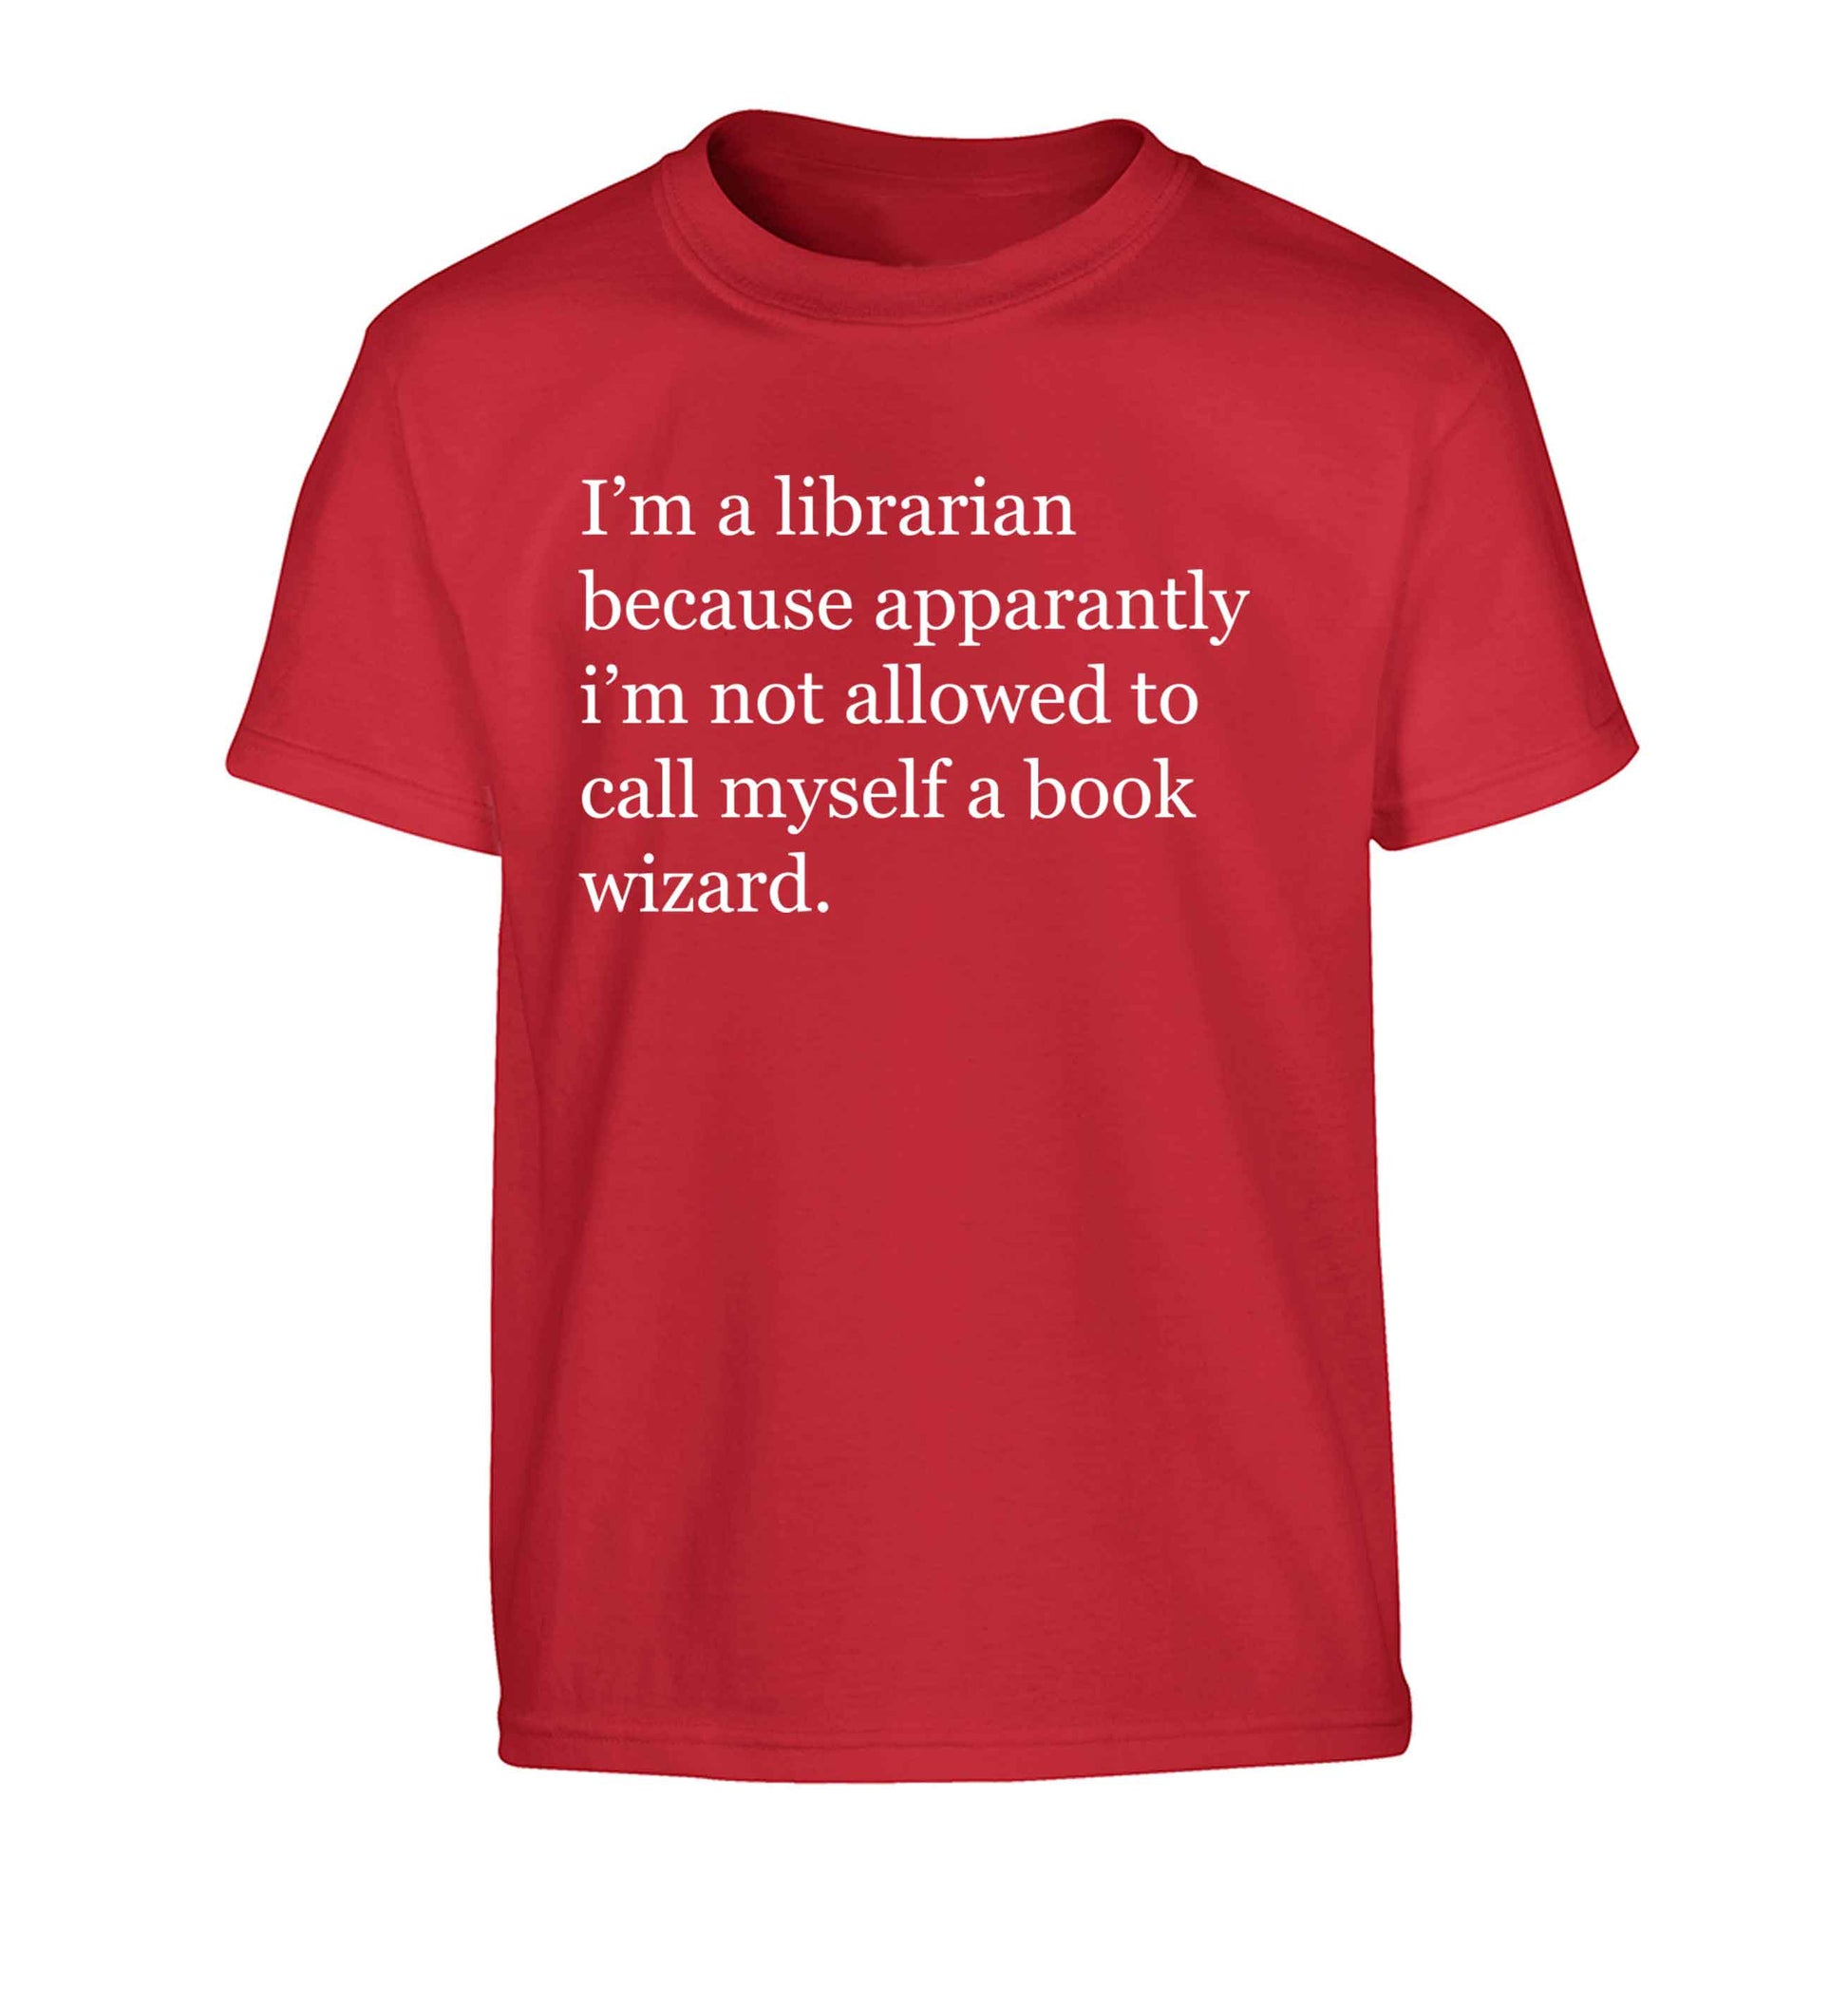 iÕm a librarian because apparantly iÕm not allowed to call myself a book wizard Children's red Tshirt 12-13 Years